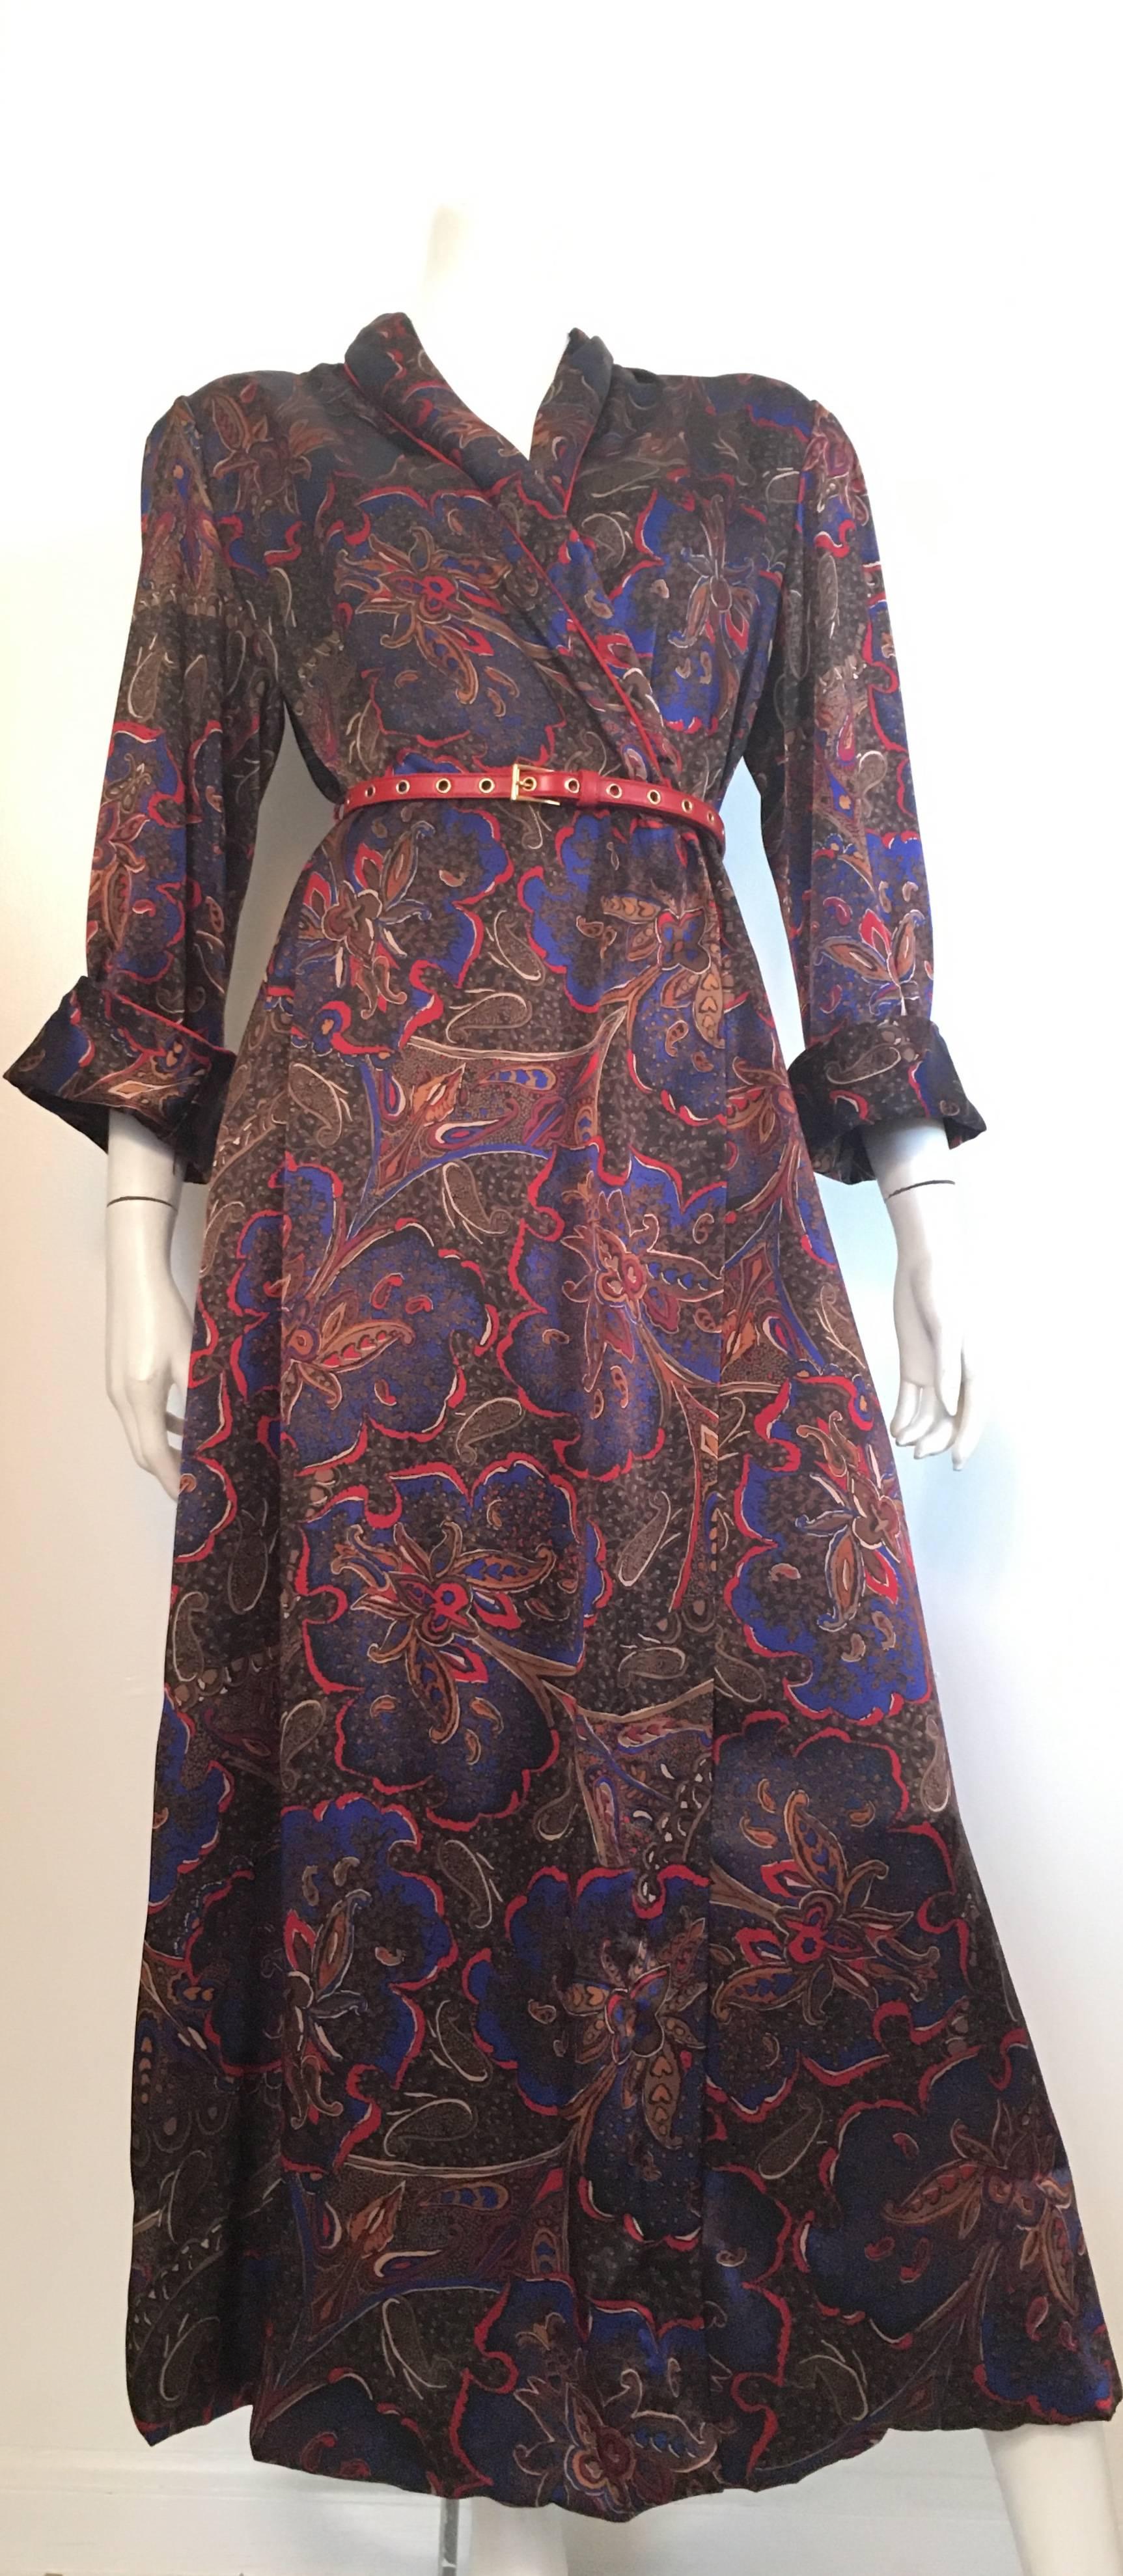 Bill Blass for Neiman Marcus 1980s paisley wrap dress with pockets is a size medium. This will fit a woman size 6-8 but please use the measurements provided to make sure this lovely piece will fit your lovely body perfectly. Dress has shoulder pads